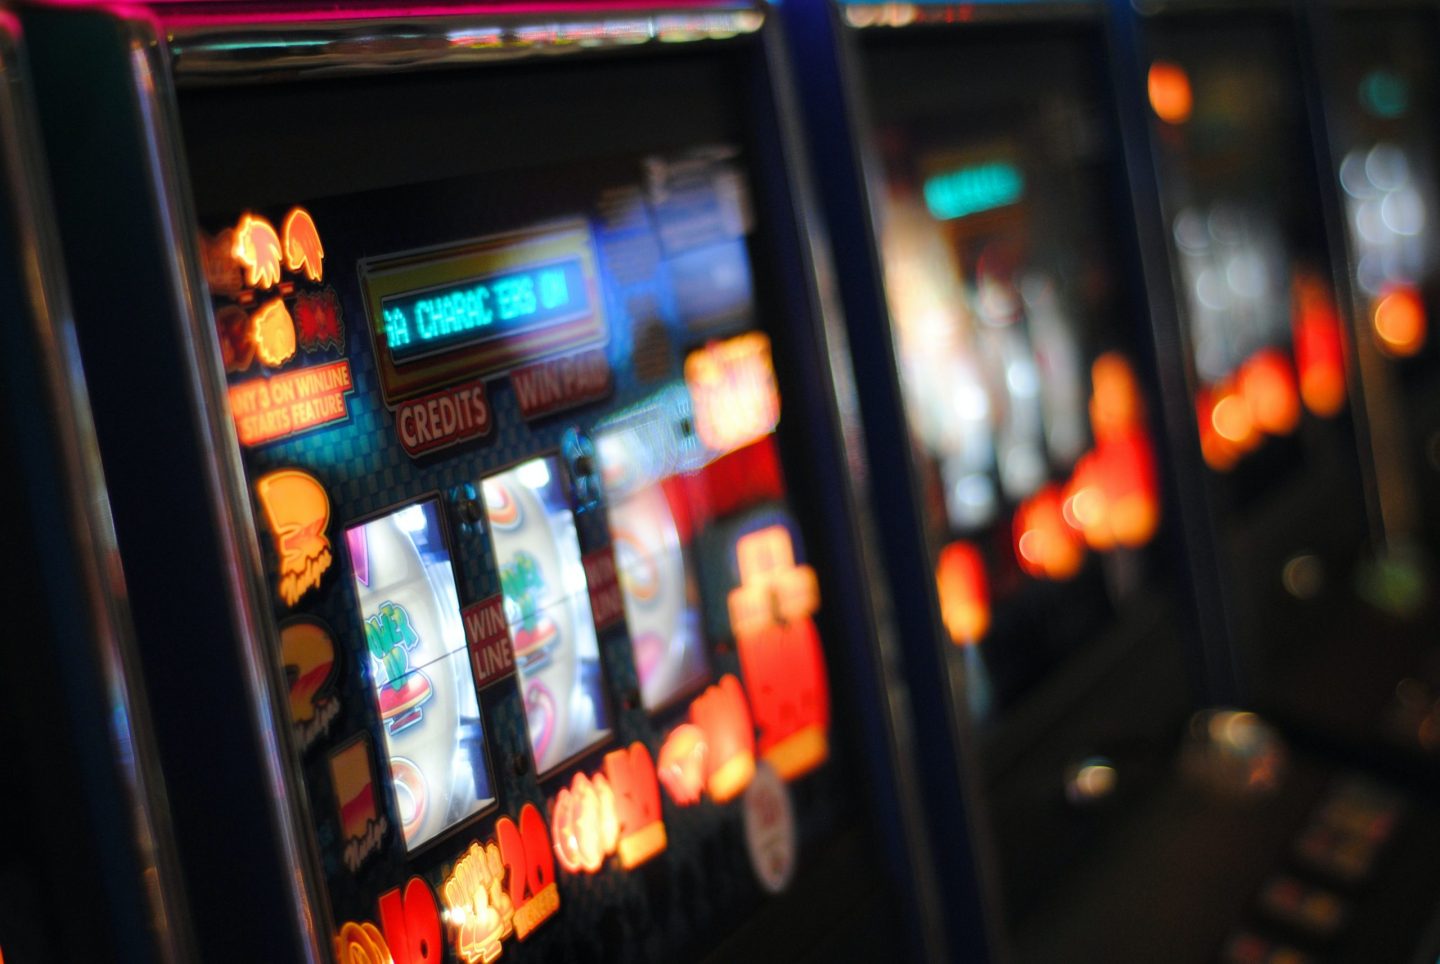 THE FIVE MOST PLAYED SLOT GAMES AT IGNITION CASINO